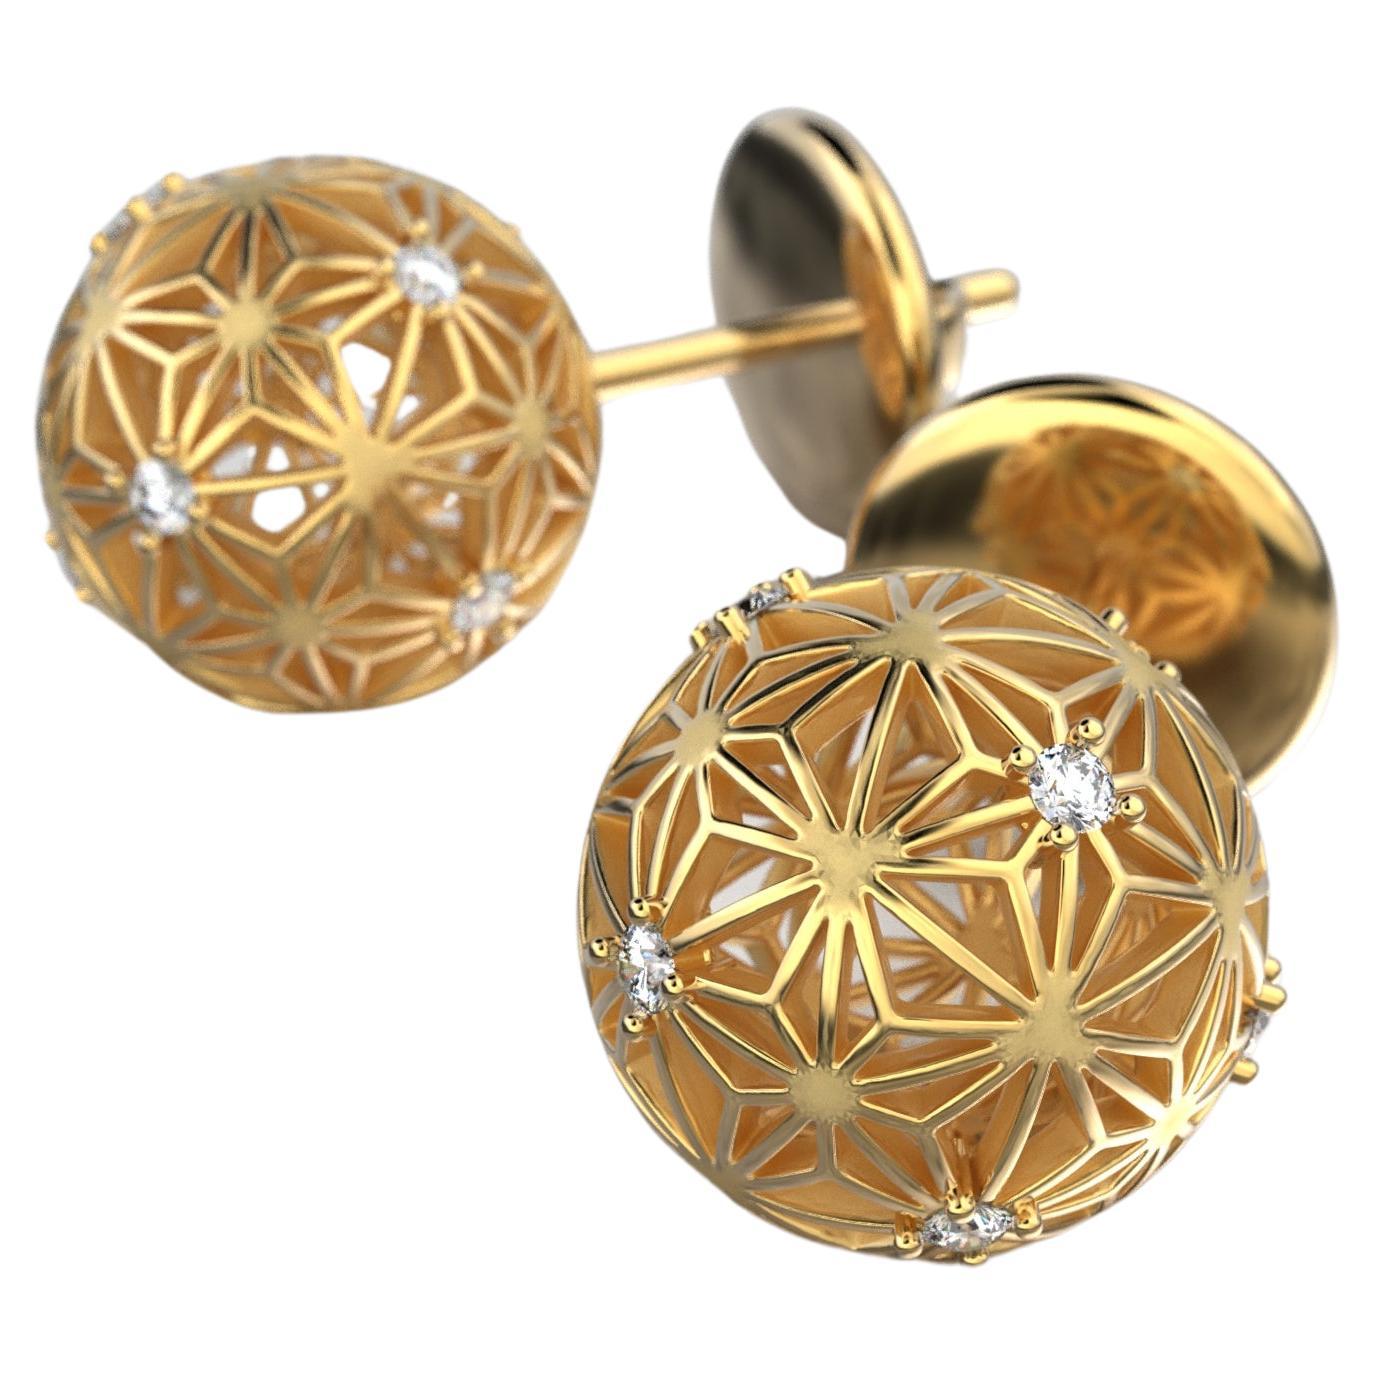 Oltremare Gioielli Diamond Stud Earrings in 18k Gold Made in Italy  For Sale